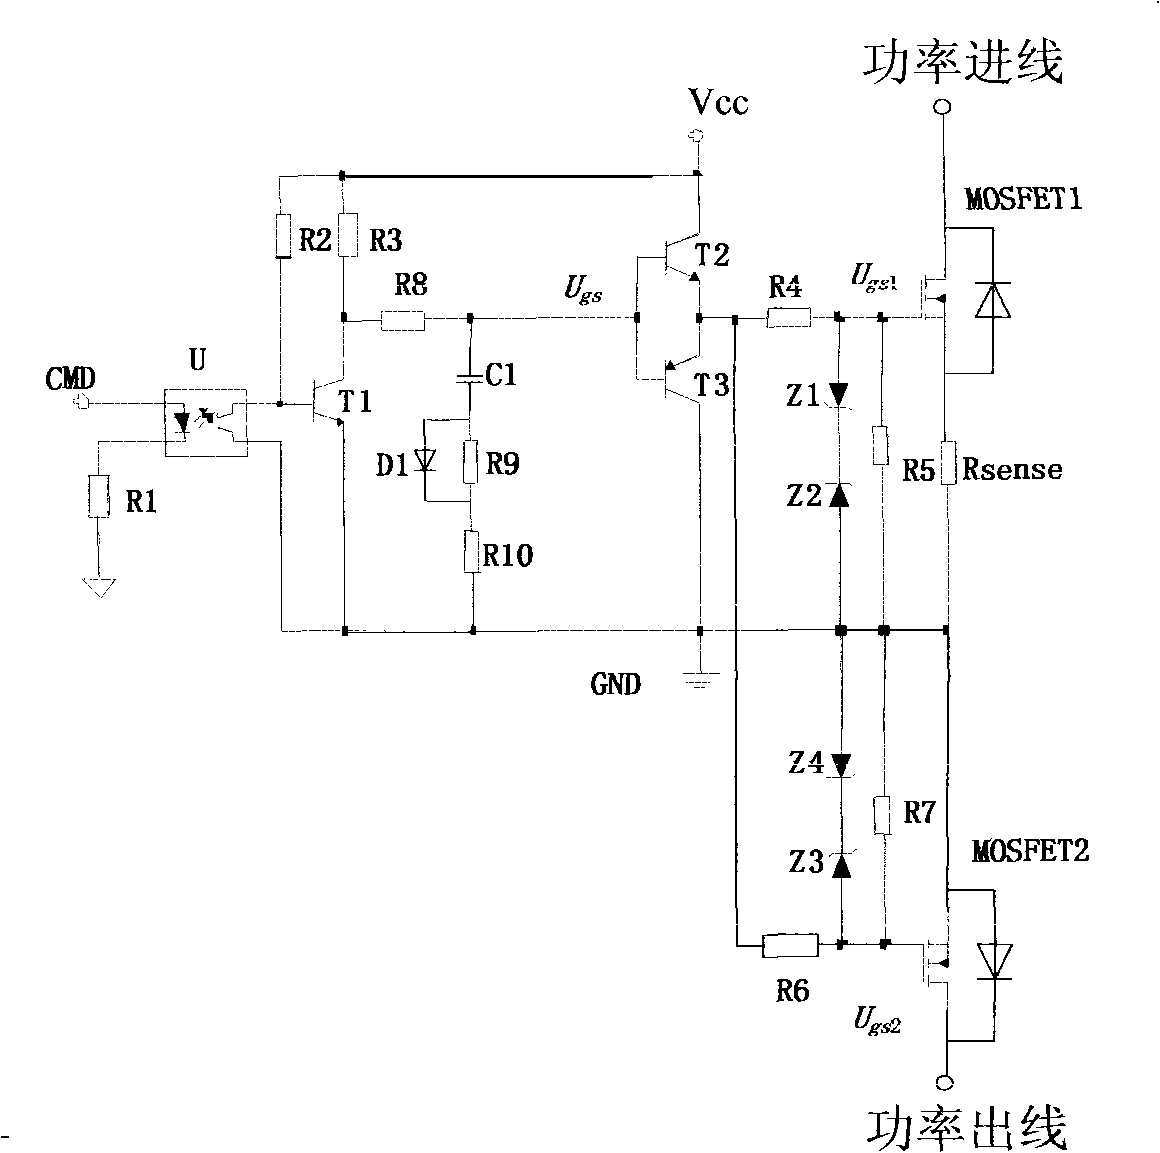 Synchronous control method of 3 phase AC solid power controller